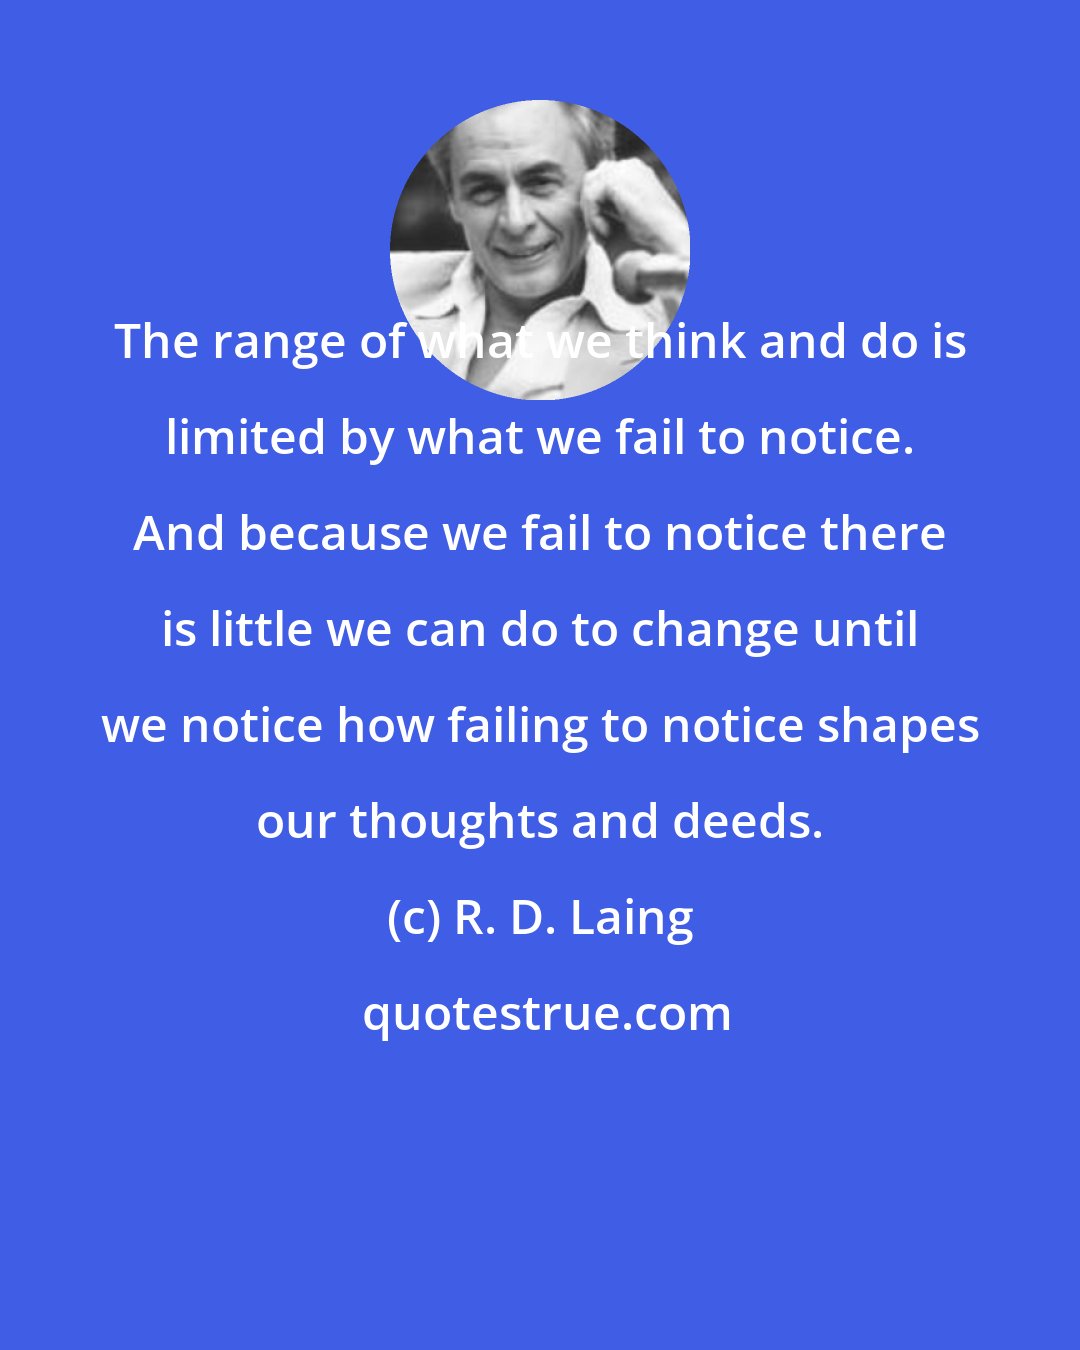 R. D. Laing: The range of what we think and do is limited by what we fail to notice. And because we fail to notice there is little we can do to change until we notice how failing to notice shapes our thoughts and deeds.